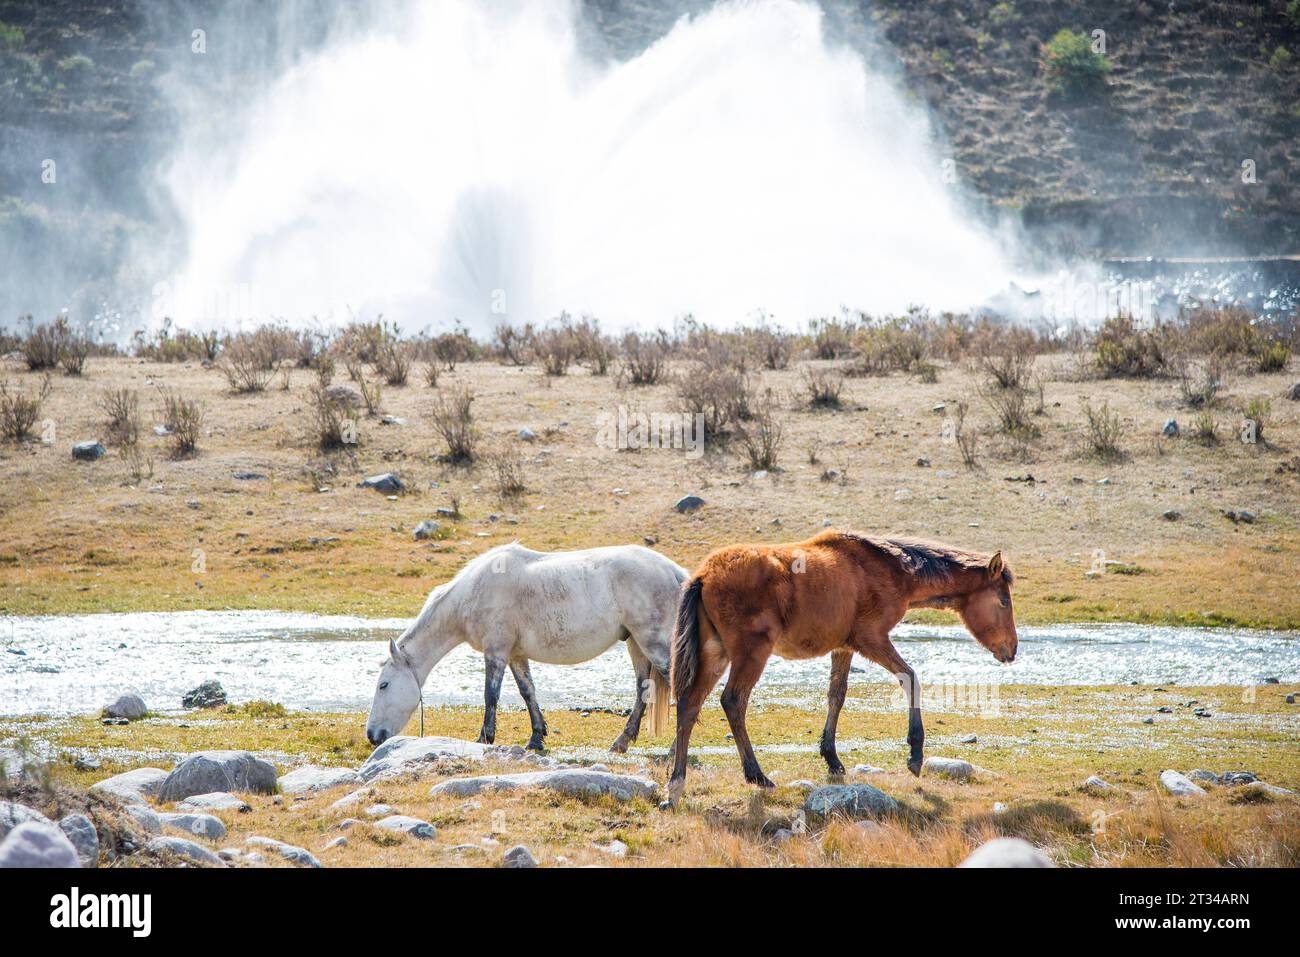 Wild horses grazing on the edge of a dam in Tucumán, Argentina Stock Photo